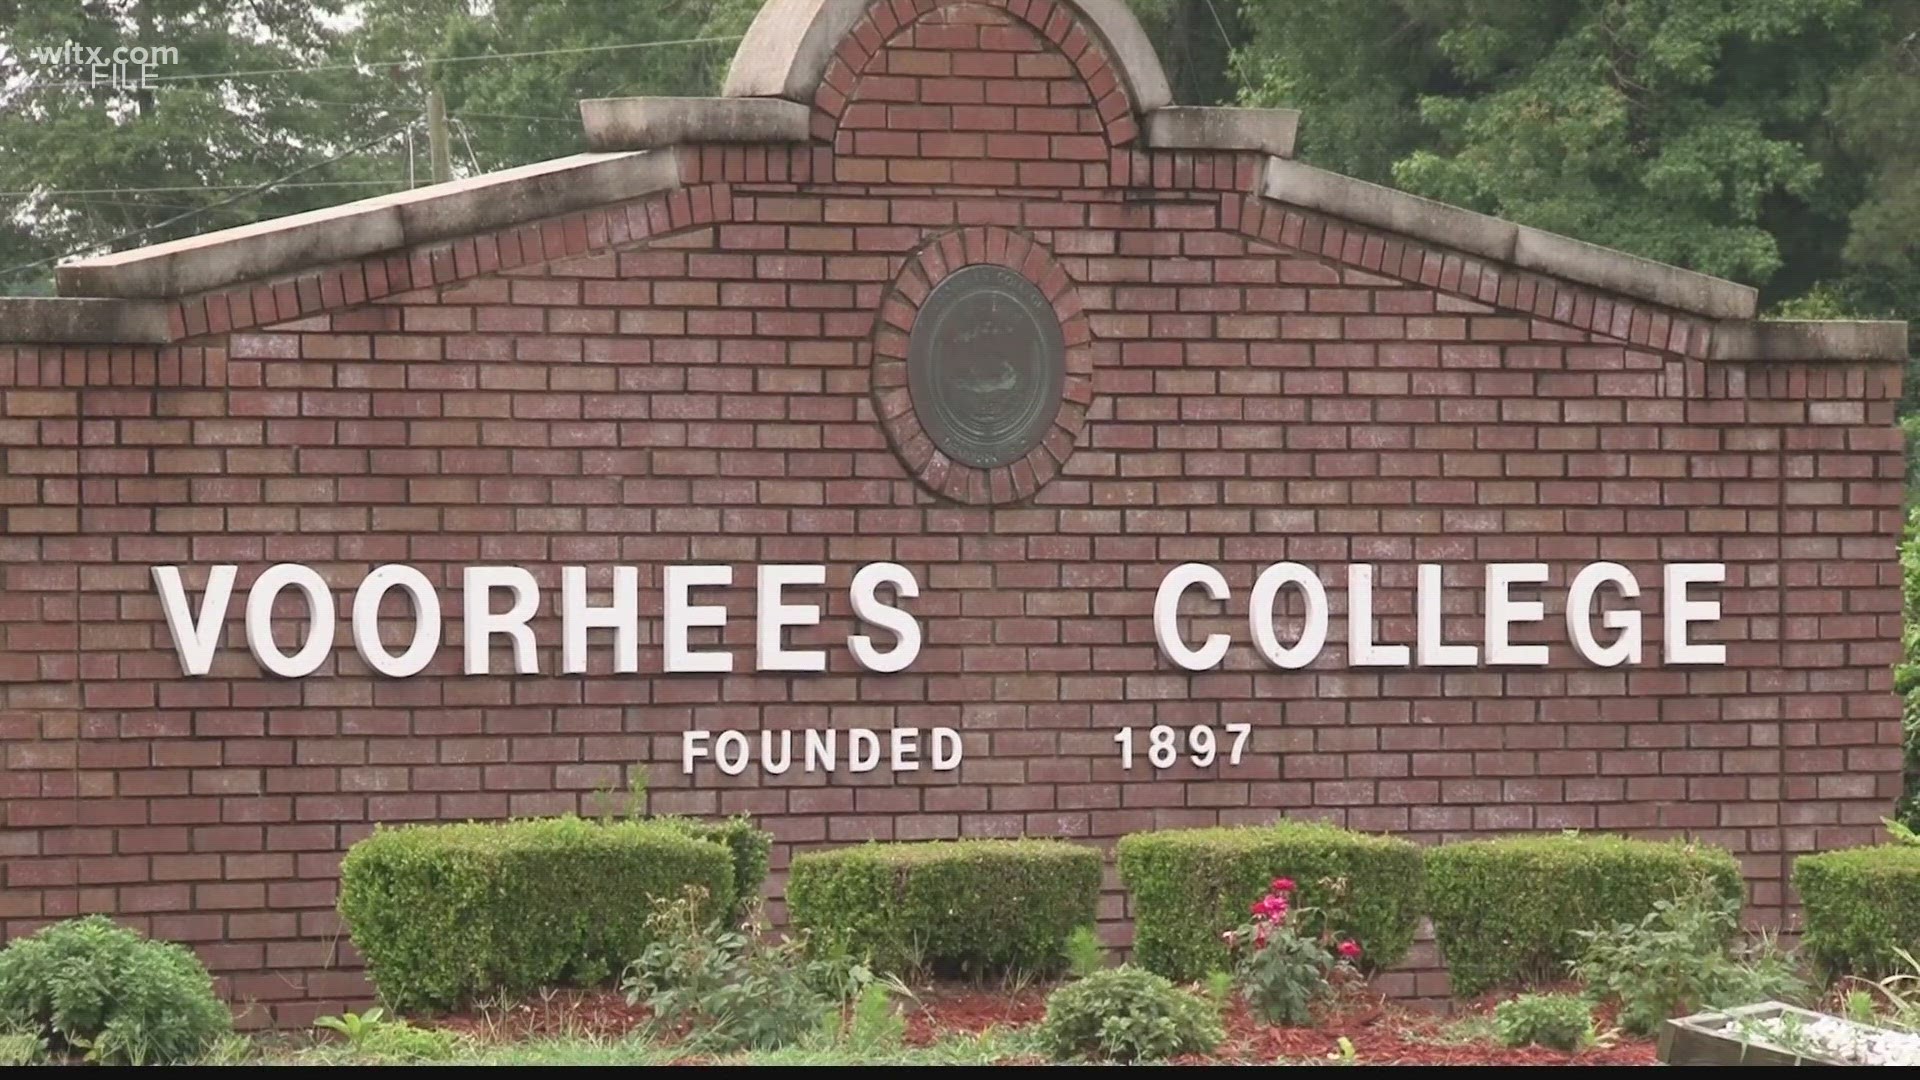 On Tuesday, officials announced that South Carolina was awarded $1,965,332 in funding for Voorhees University, one of South Carolina’s eight HBCUs.